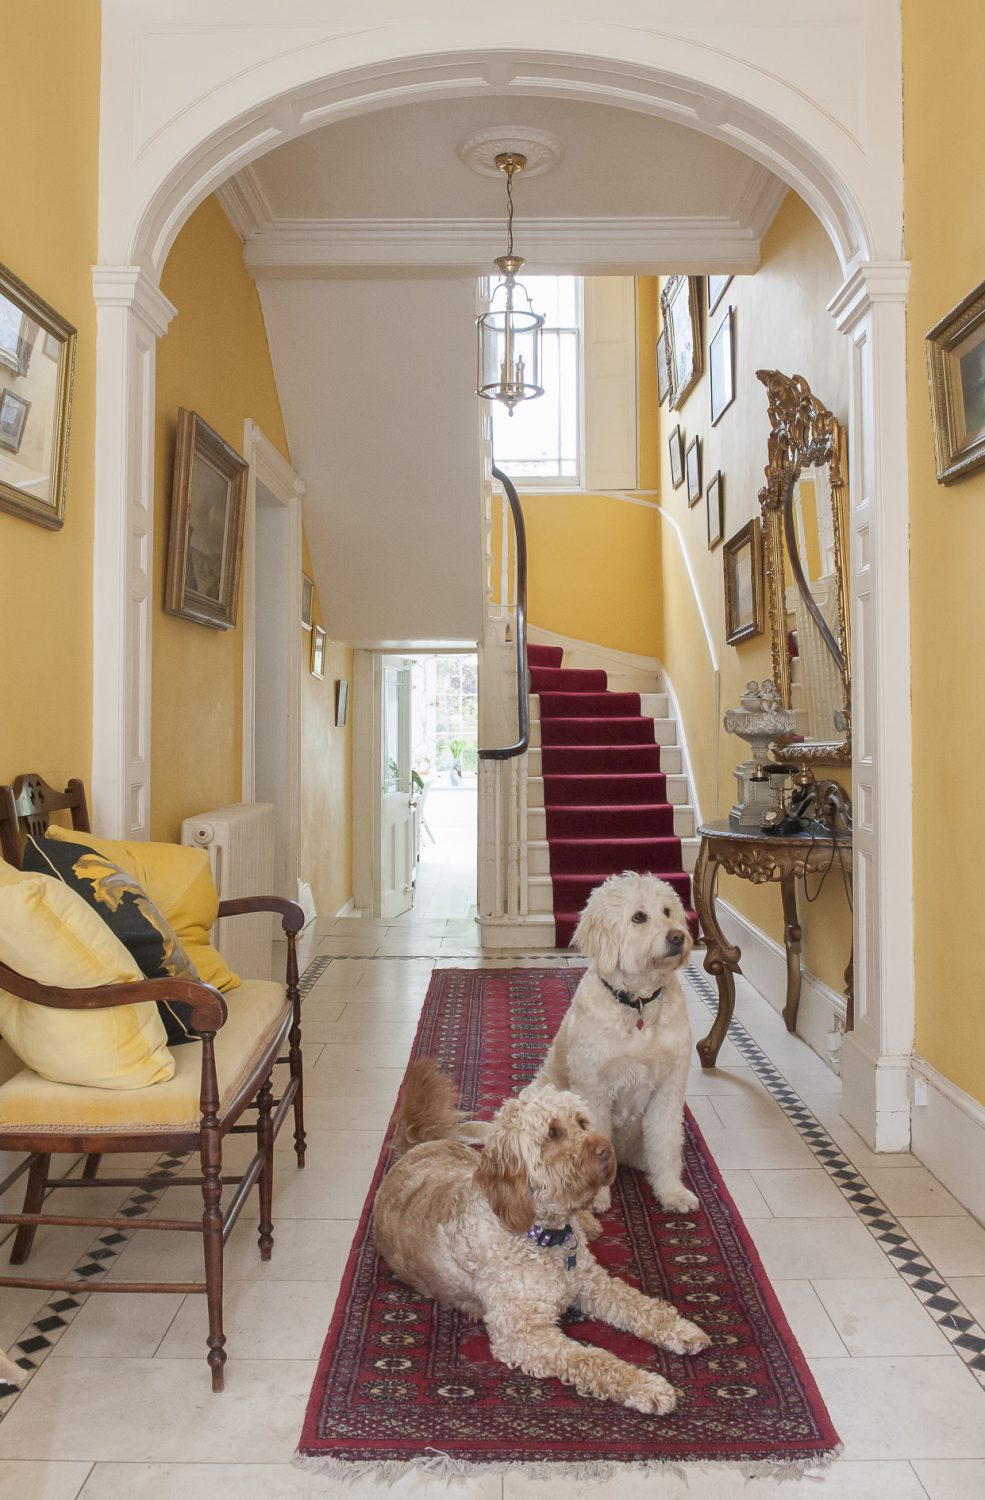 Dawn’s Goldendoodles wait patiently to be photographed in the hallway